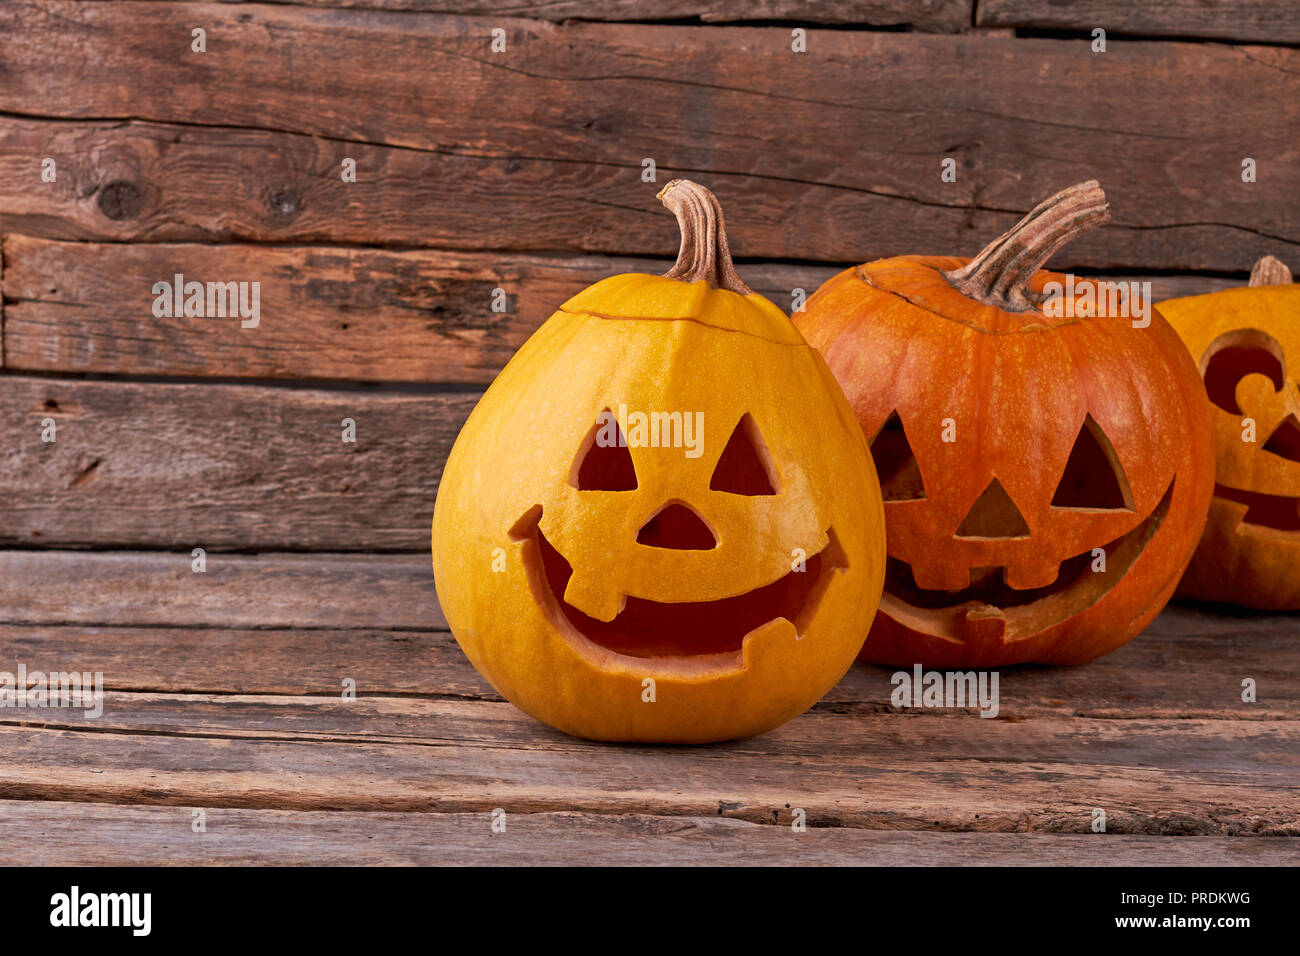 Funny Halloween pumpkins on rustic background. Stock Photo